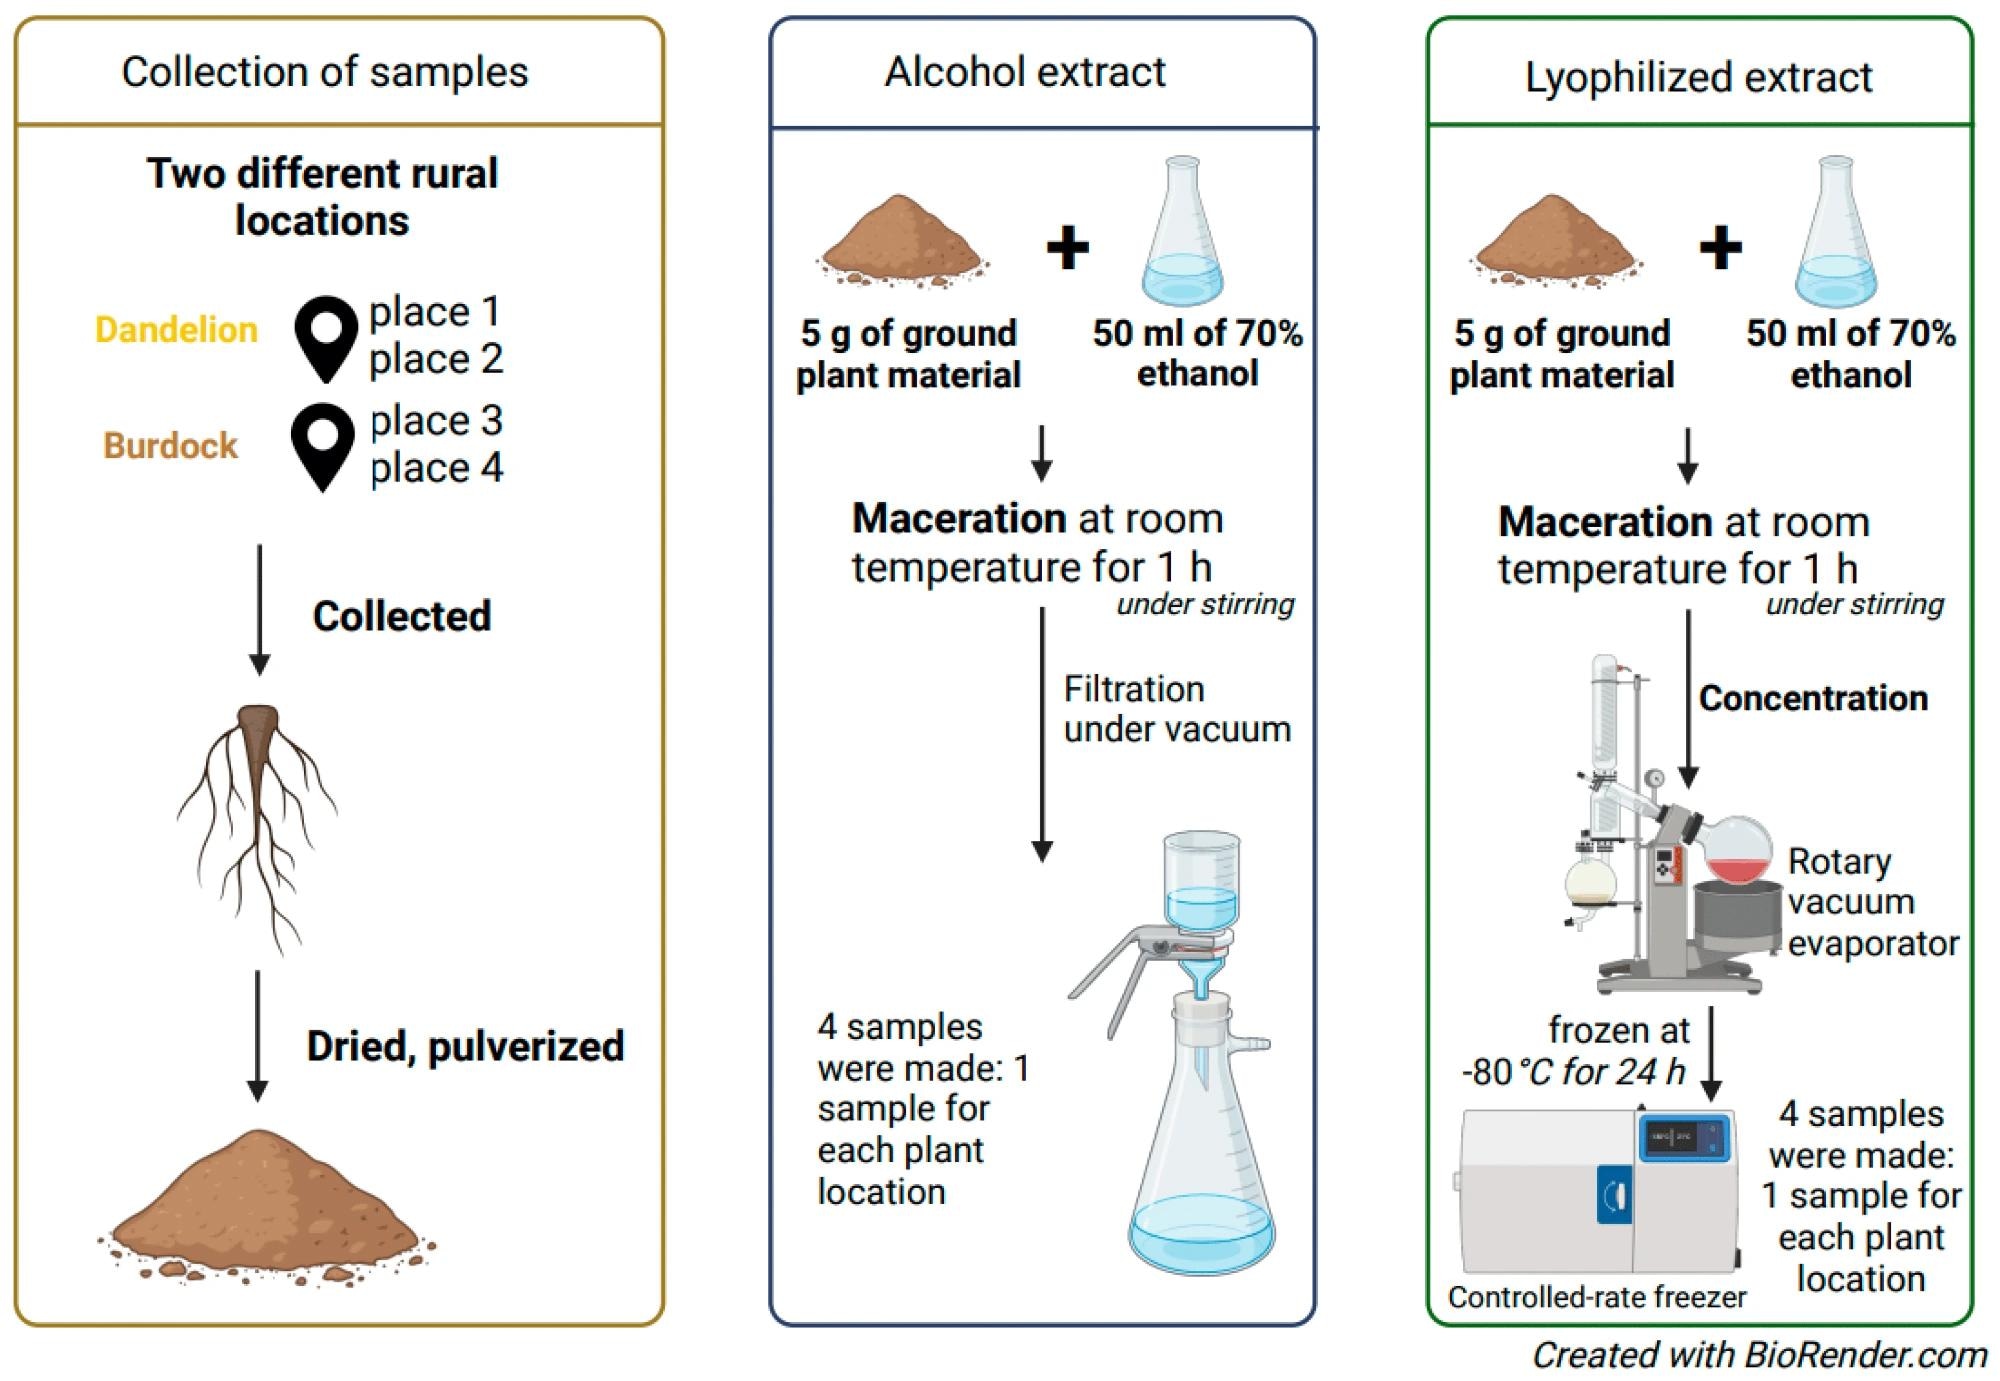 Preparation of ethyl alcohol and lyophilizate extracts.